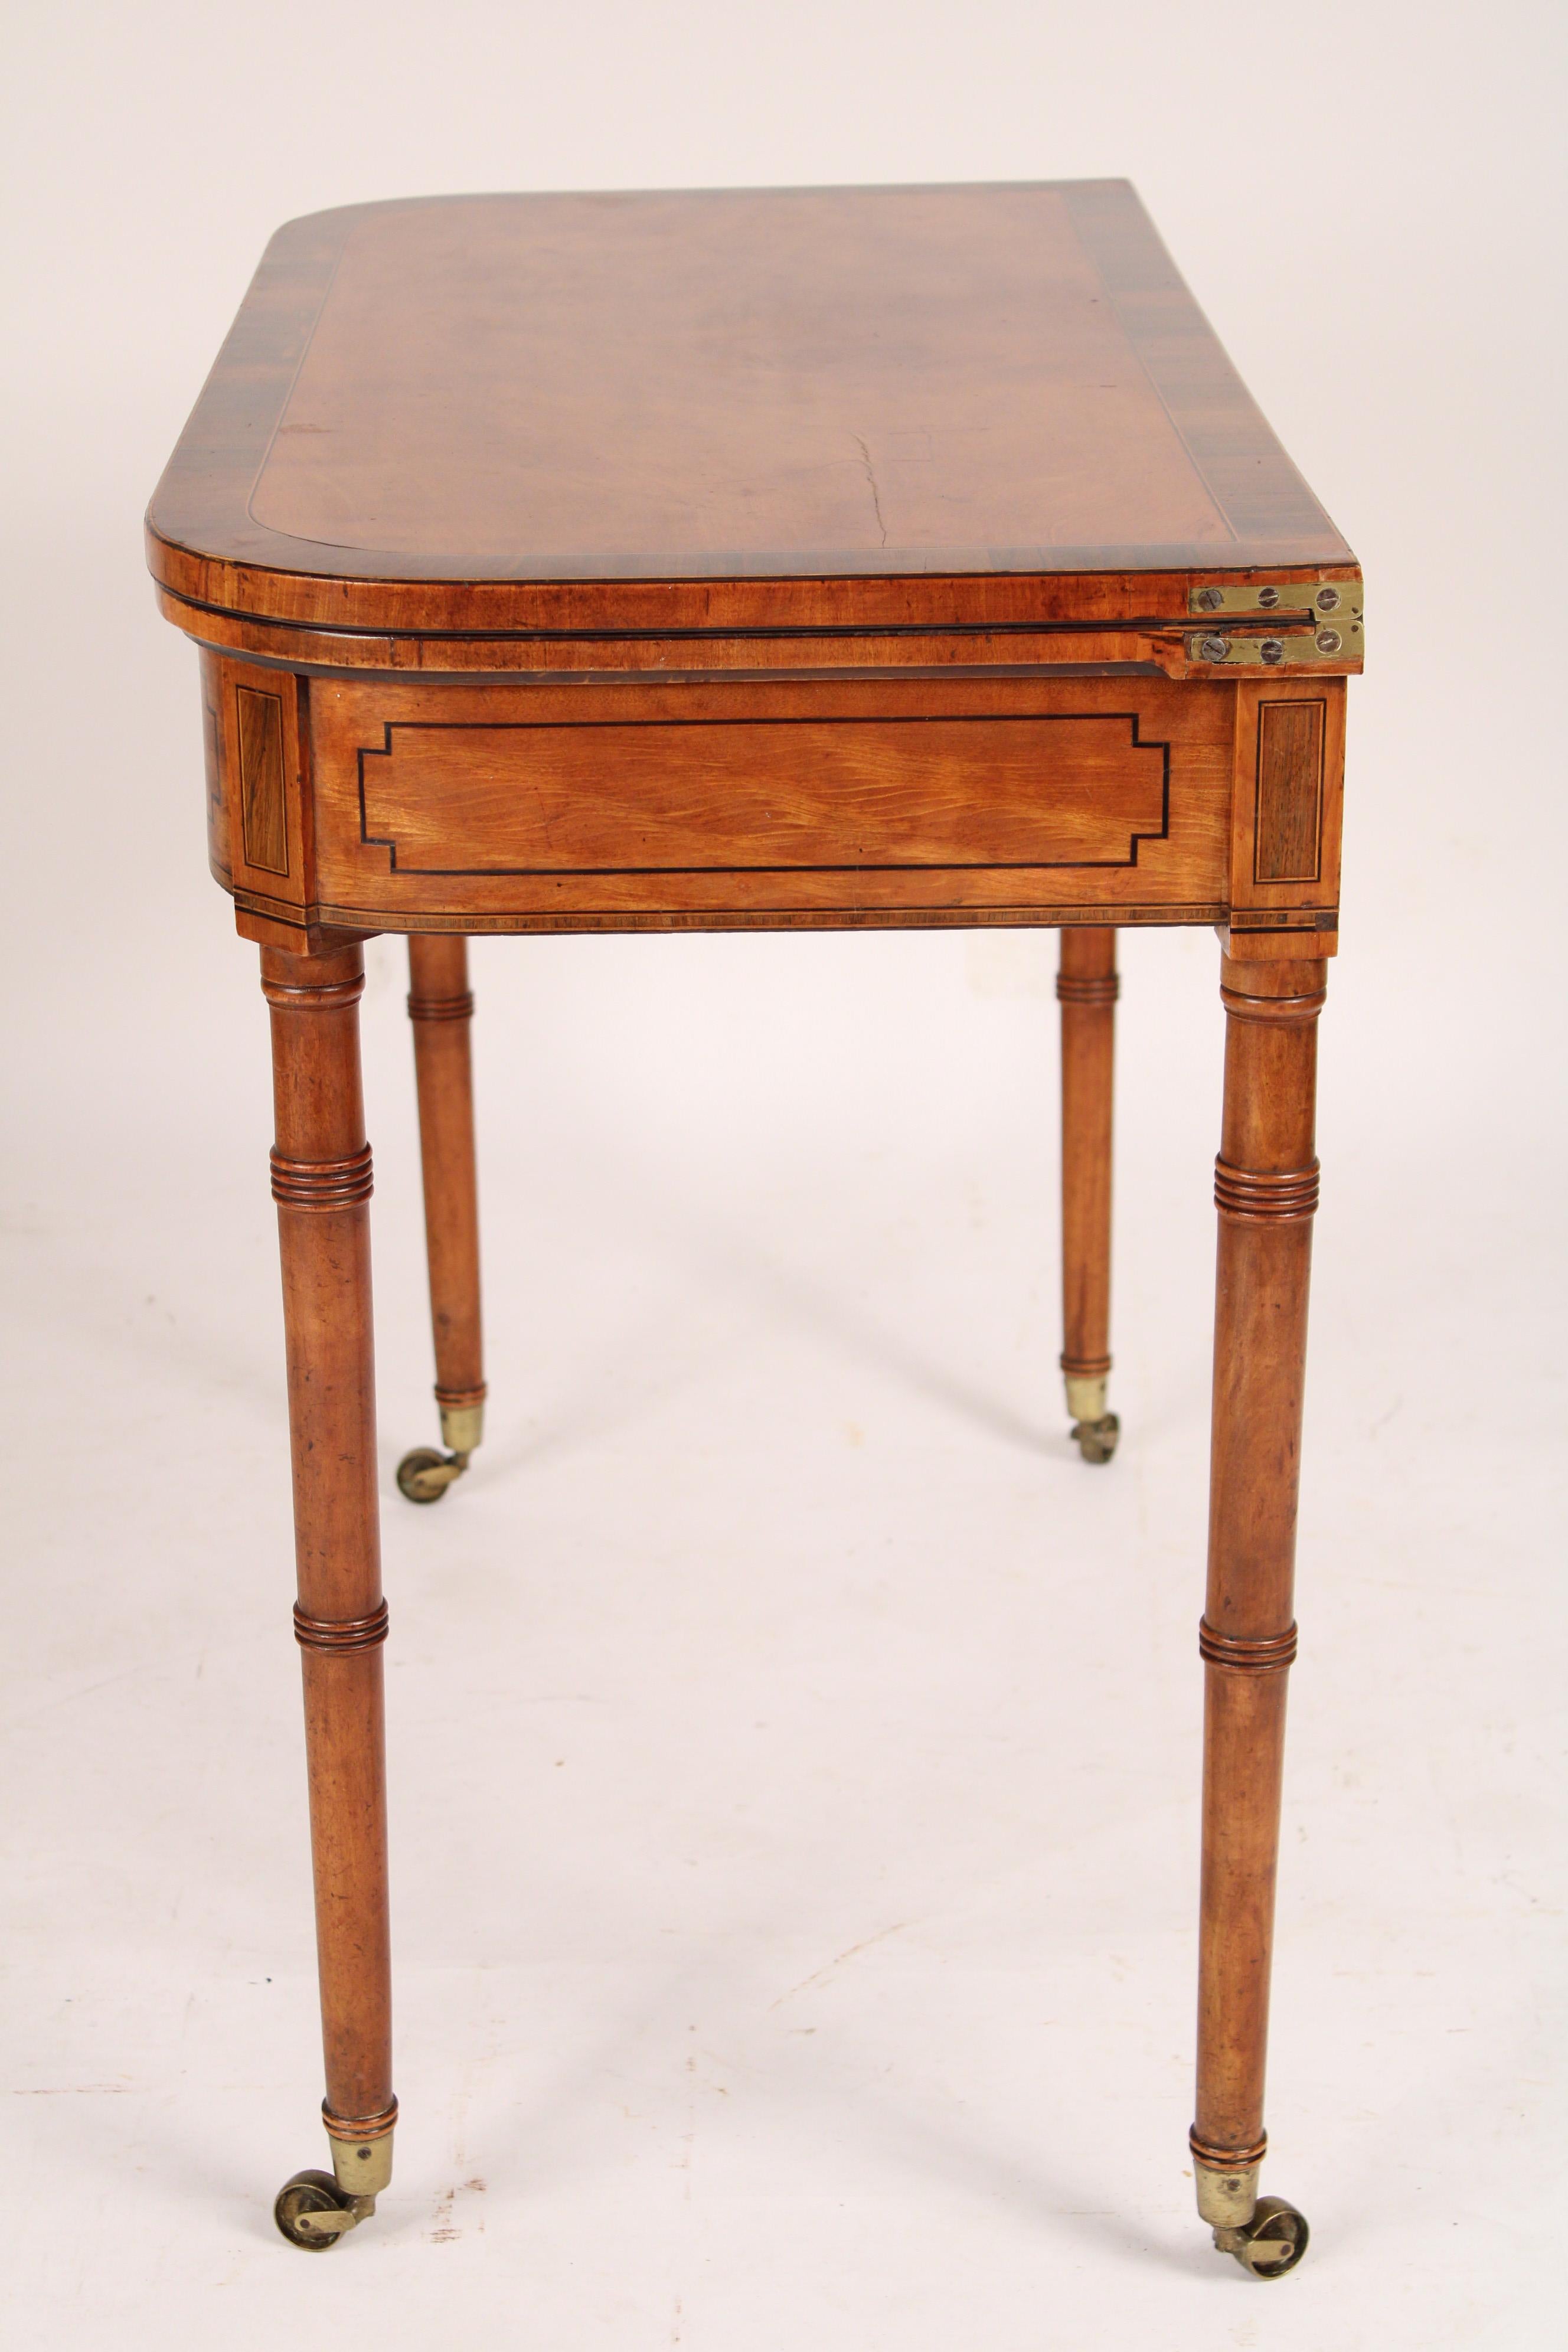 19th Century Antique George III Style Satin Wood Games Table